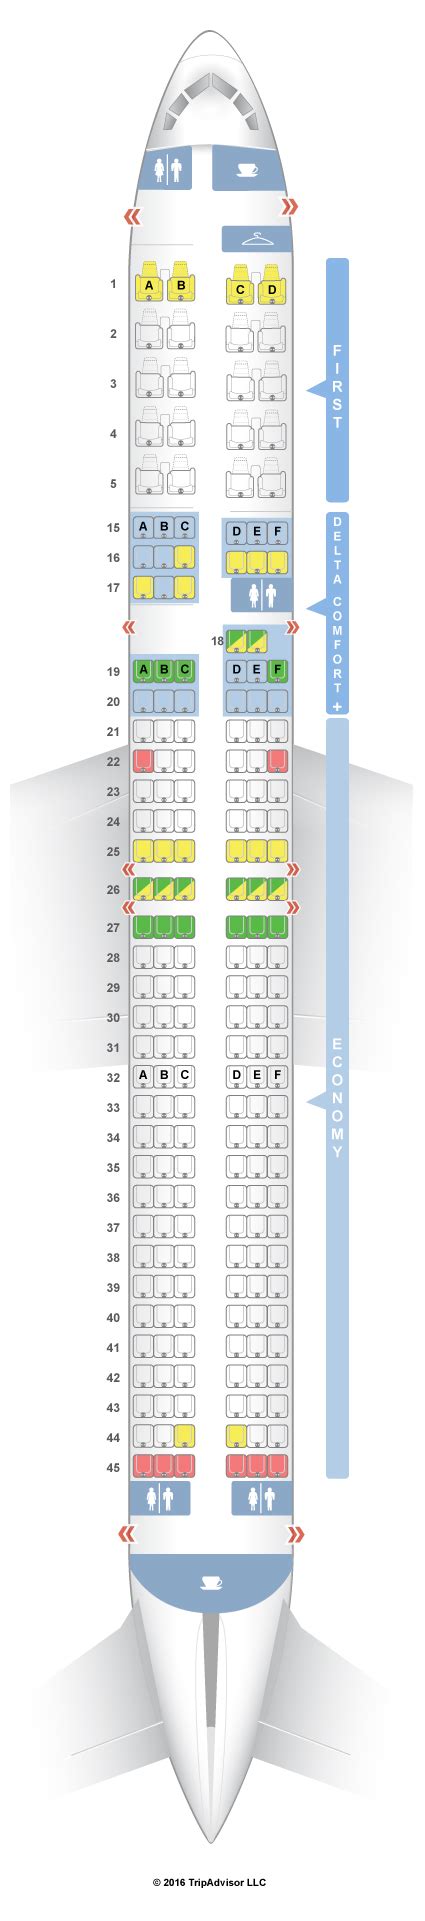 The Amercian Airlines Airbus A321neo ACF (Airbus Cabin Flex) is mainly utilized on North American routes. The aircraft is configured with 20 recliner-style First Class seats, 47 Main Cabin Extra seats featuring additional legroom, and 129 standard Main Cabin seats. The cabin features large overhead bins for carry-on baggage.. 